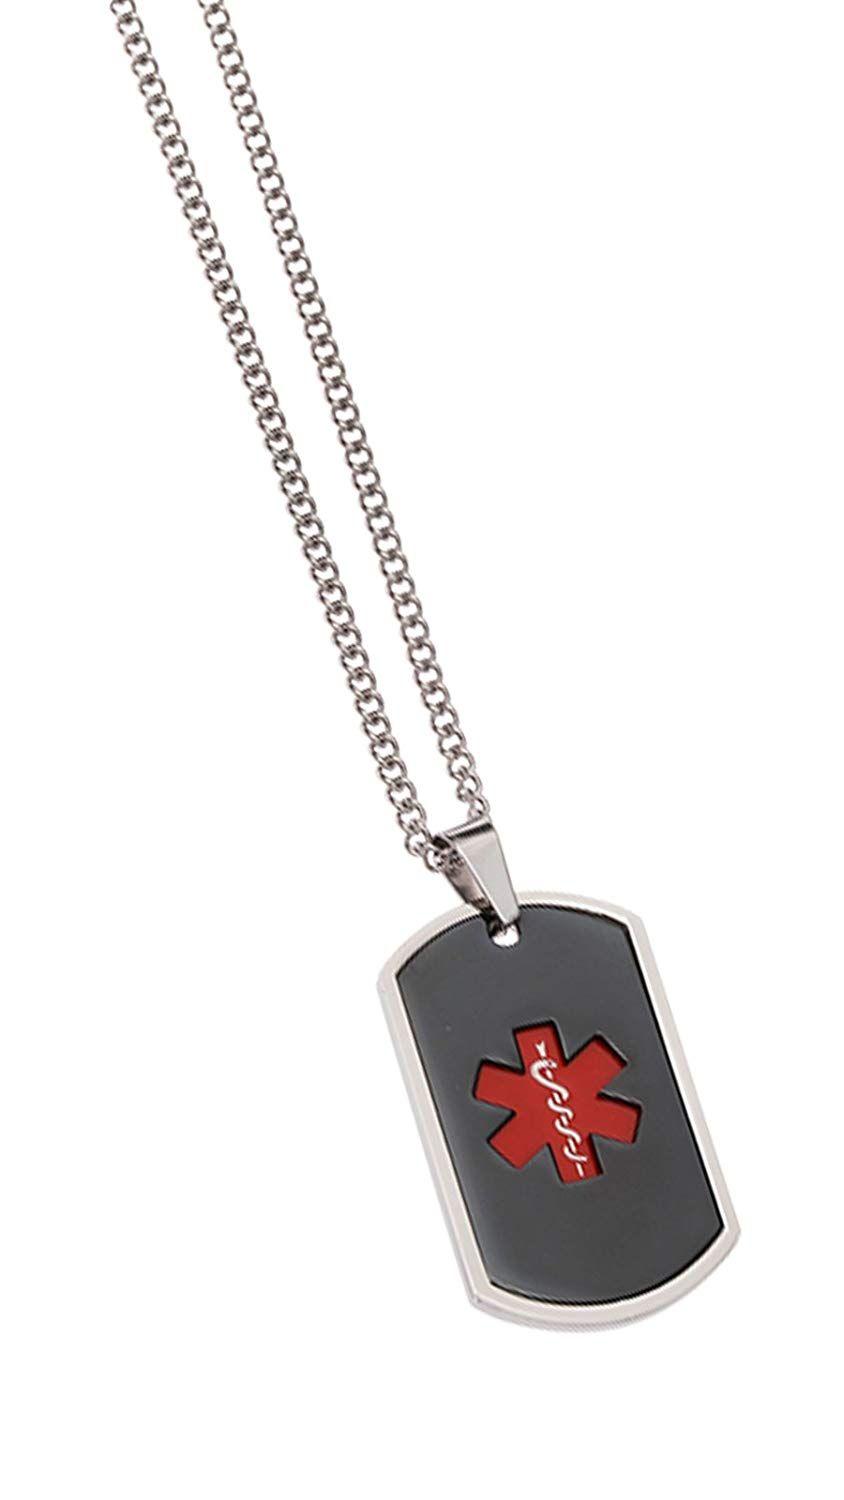 Steel Red Dog Logo - Amazon.com: Blank Stainless Steel Dog Tag Obsidian Red: Health ...